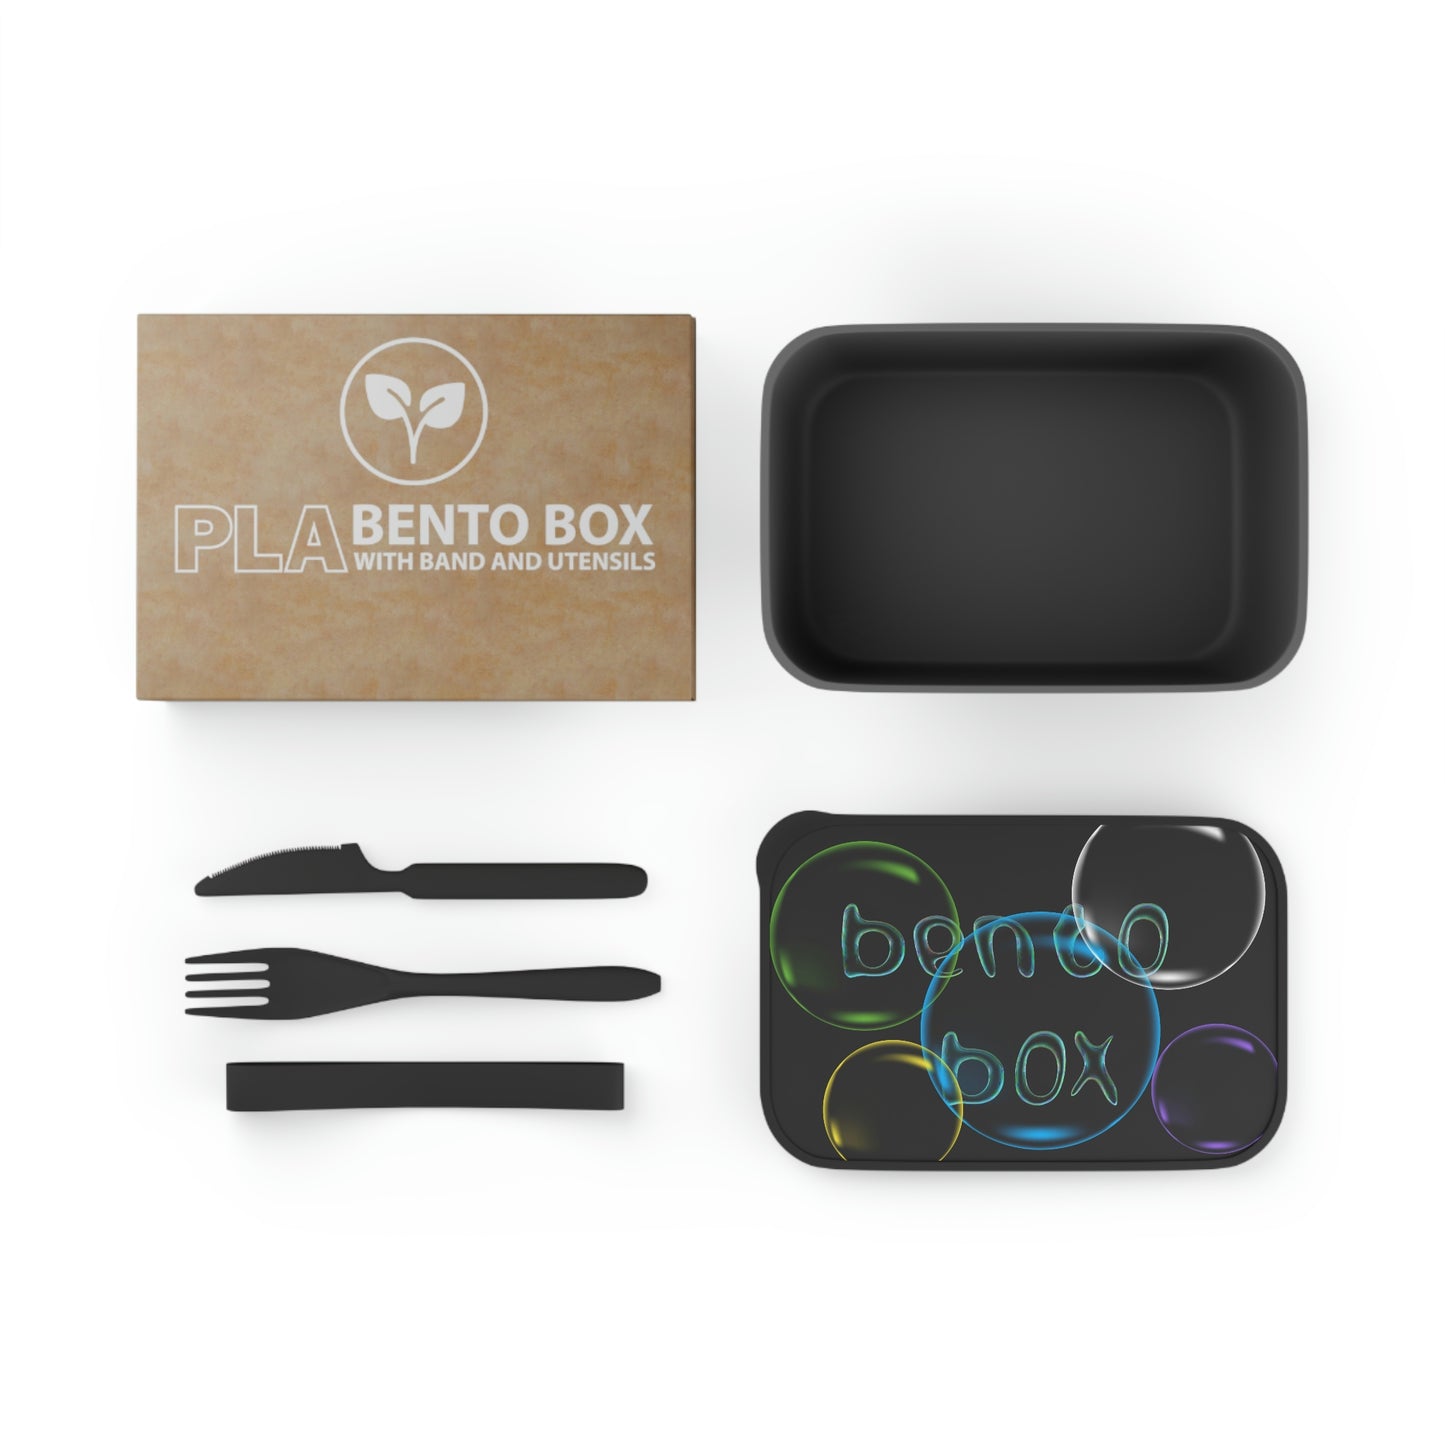 Bubbles with Bento Box Logo Lunch Box / " PLA Bento Box " with Band and Utensils